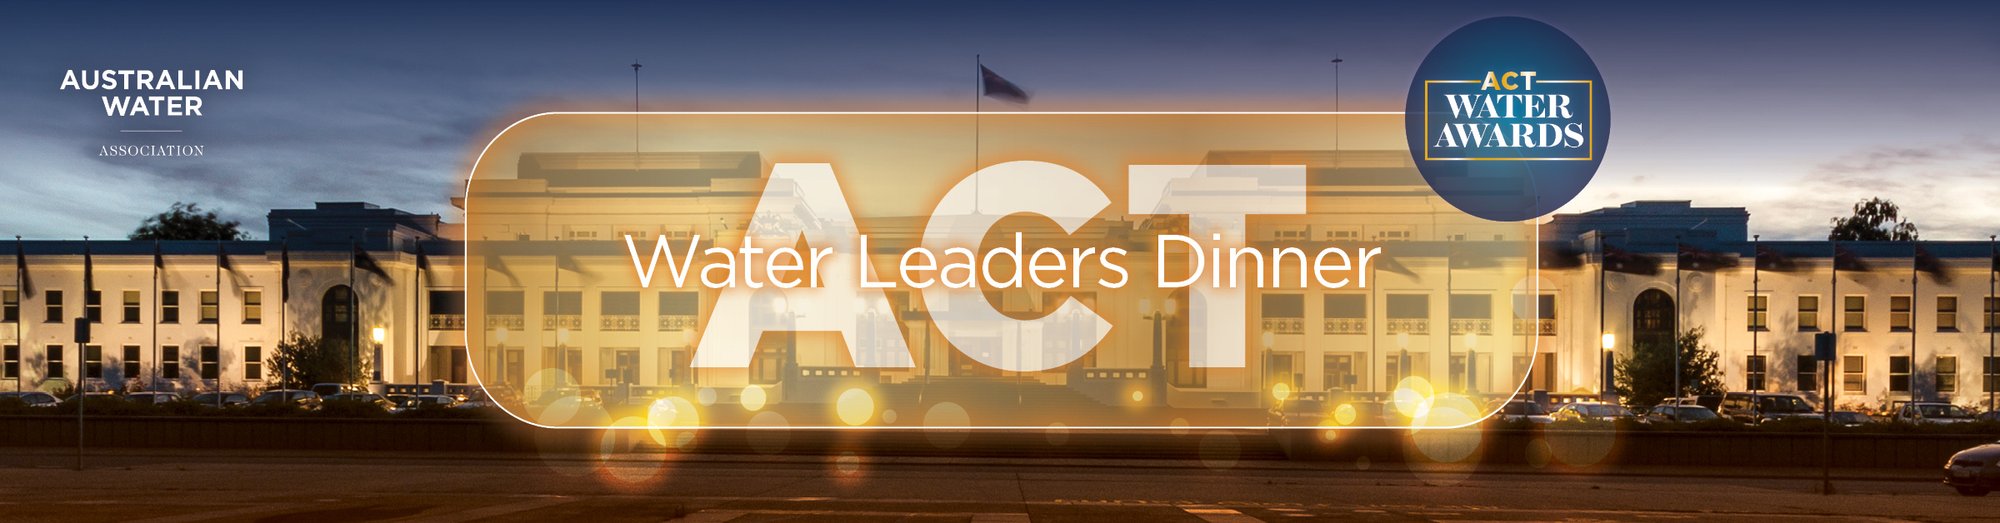 ACT Water Leaders Dinner_HubSpot Event Banner 1200x314px